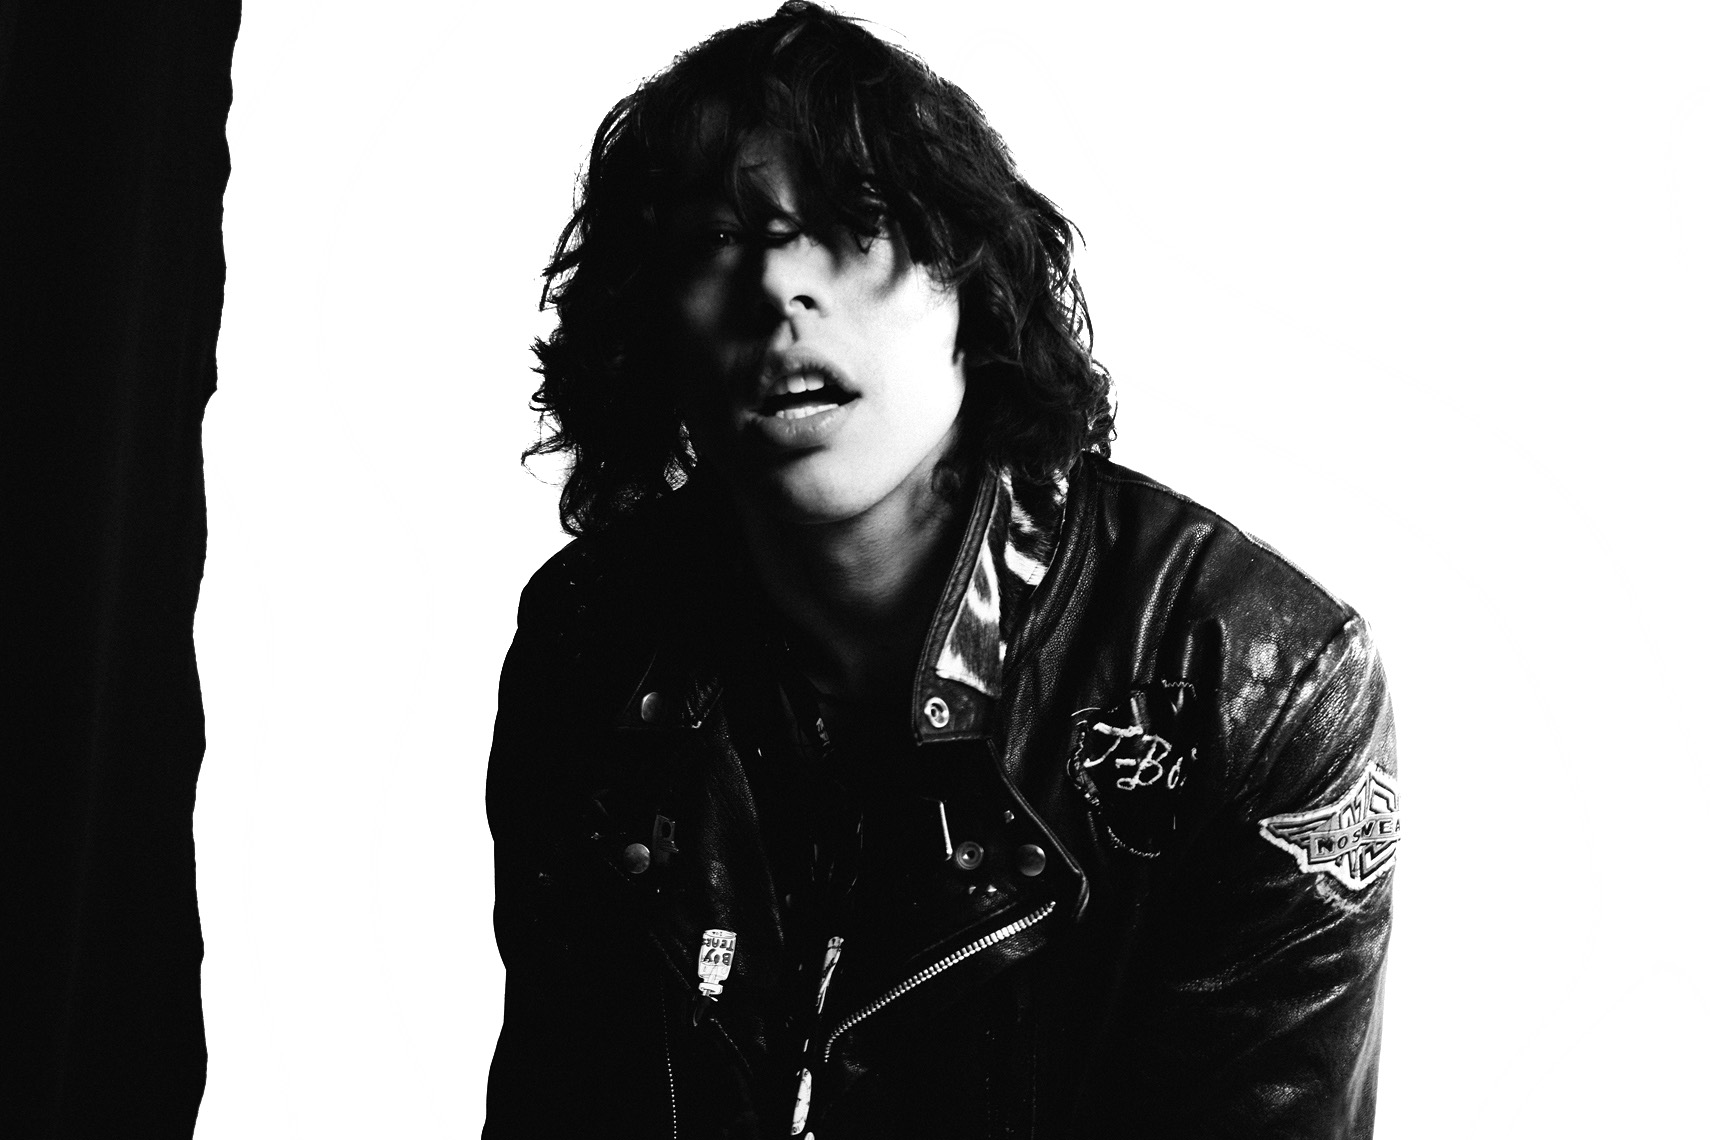 Barns Courtney by Tom Oxley